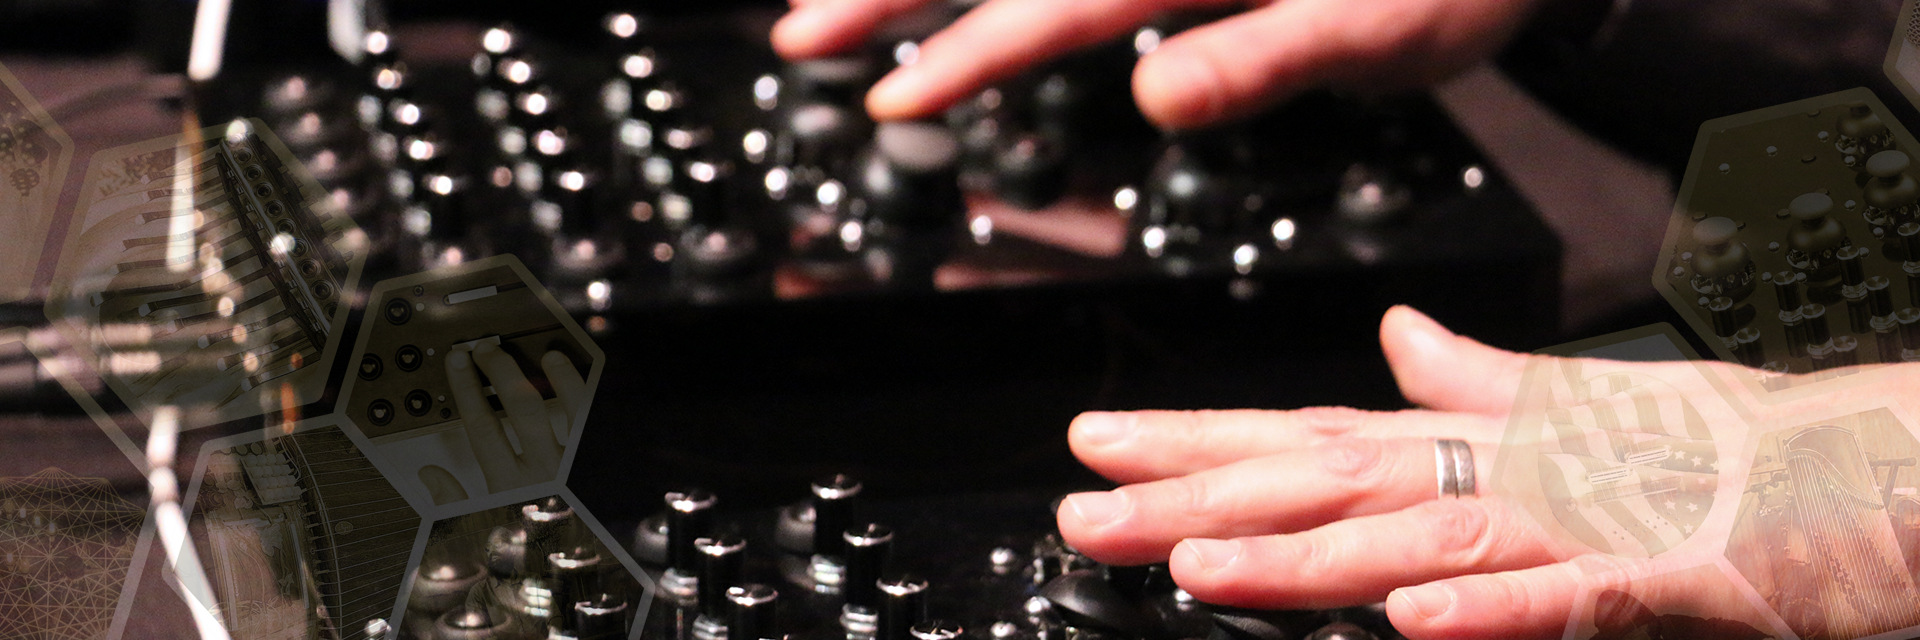 A Guthman Competition contestant's hands manipulate a board full of knobs.